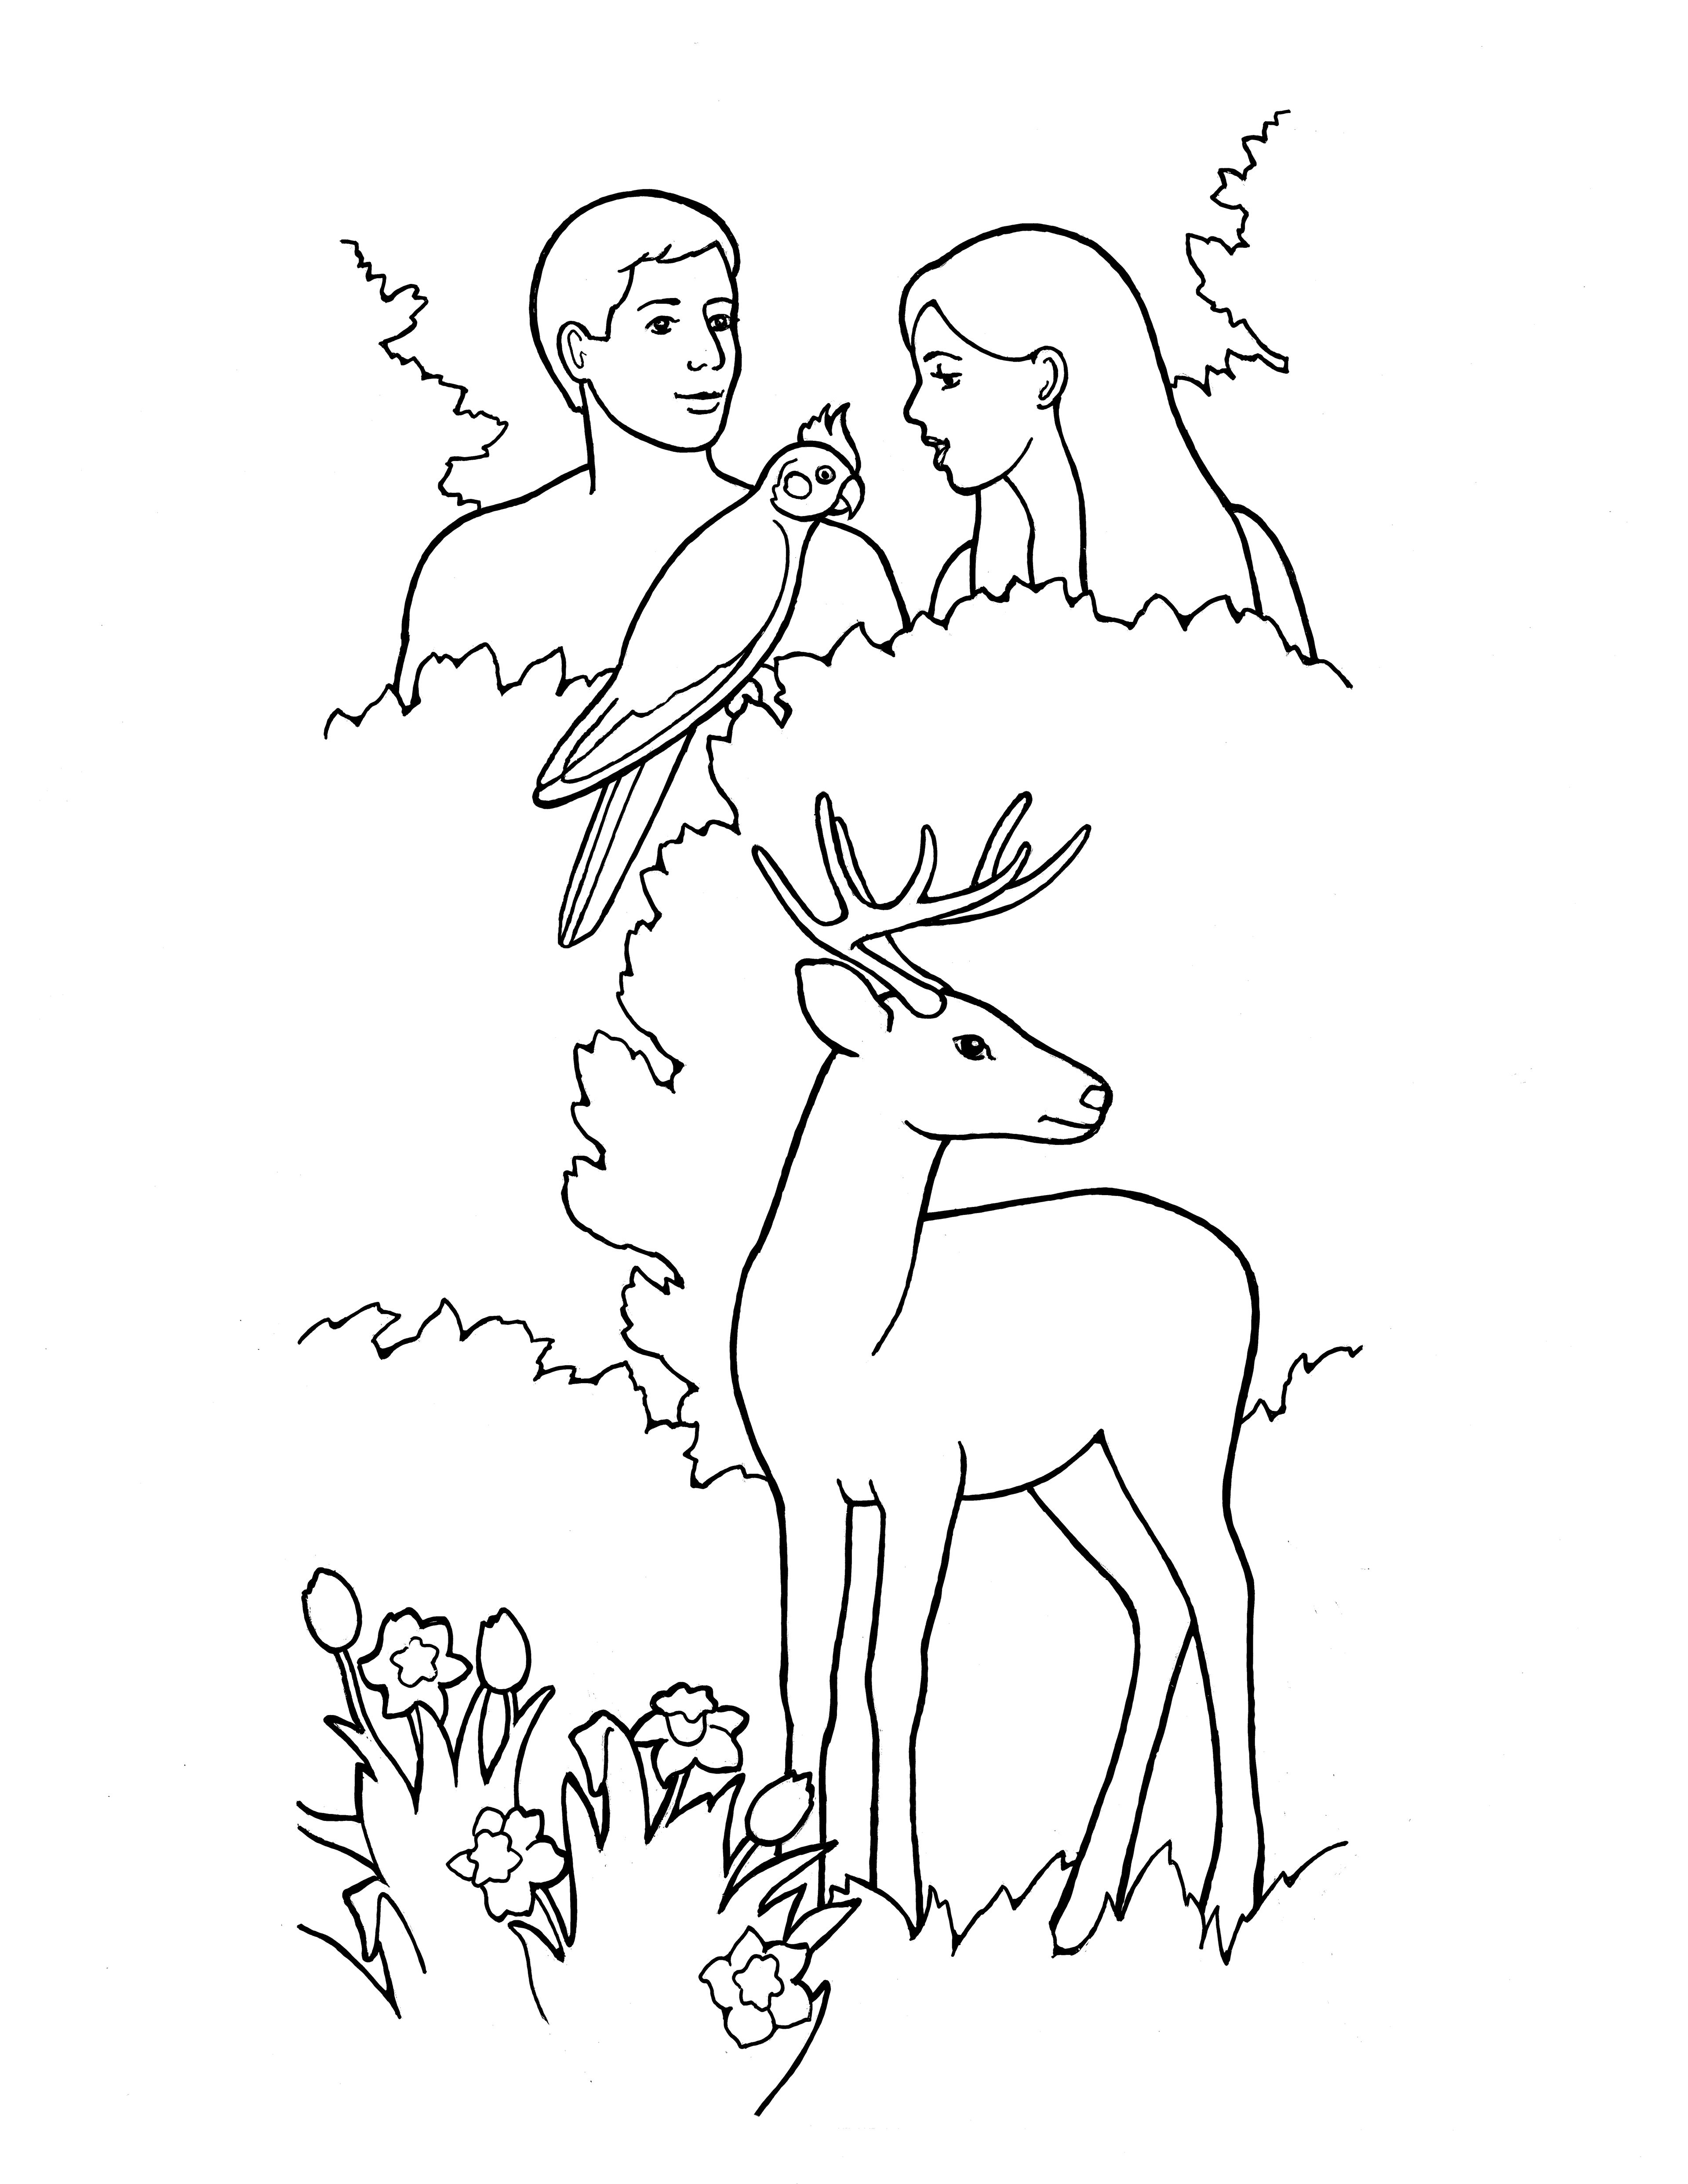 An illustration of Adam & Eve in the Garden of Eden from Nursery Manual, Behold Your Little Ones (2008), page 99.